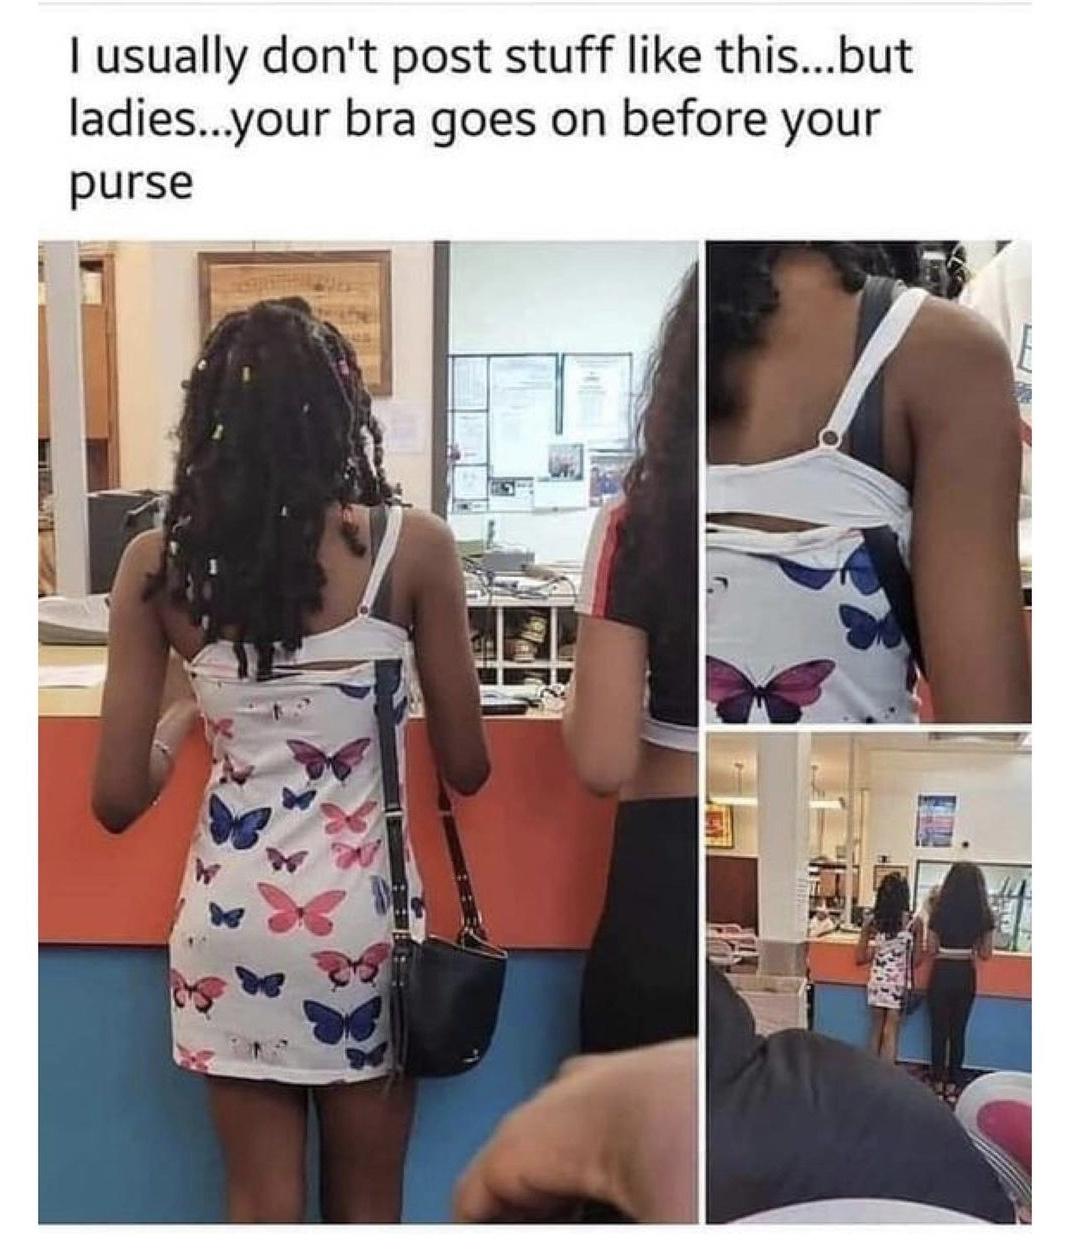 shoulder - I usually don't post stuff this...but ladies...your bra goes on before your purse Sales